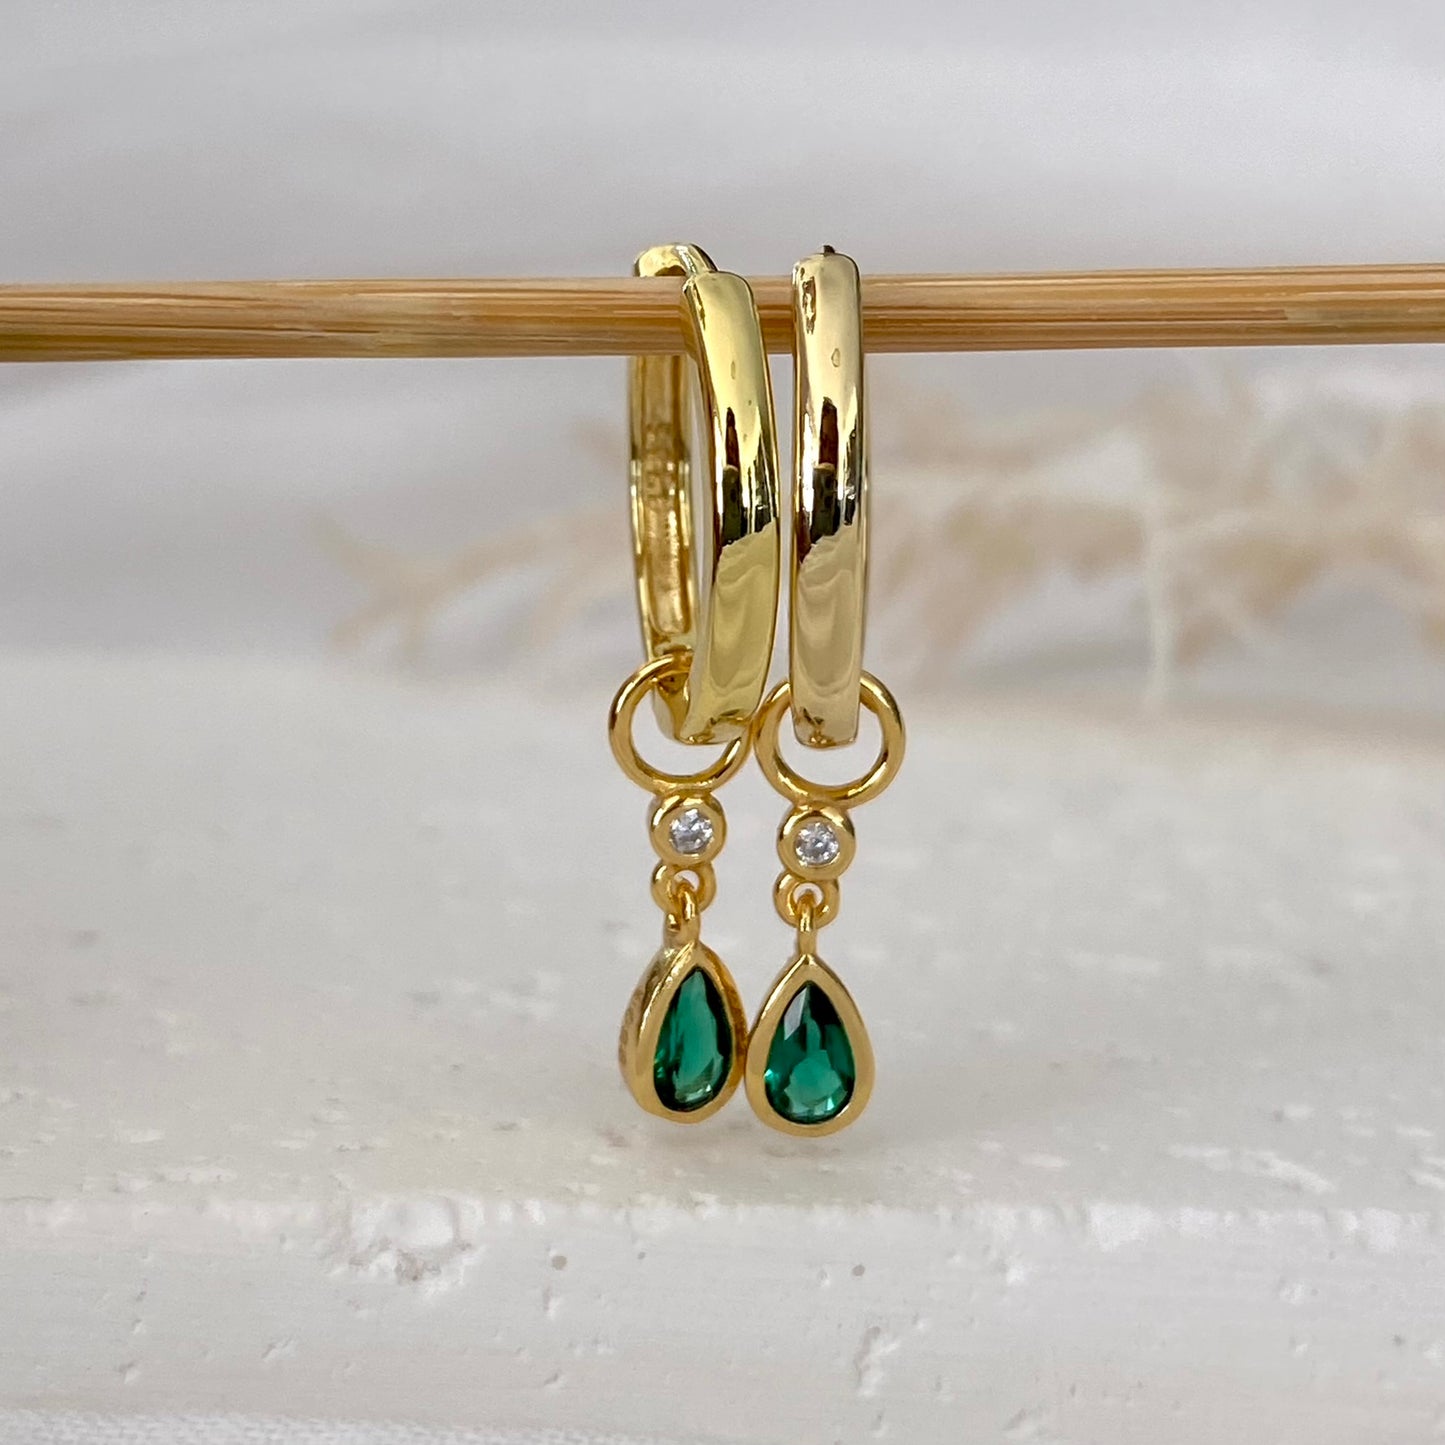 Green earrings with 925 Sterling Silver, Emerald Green charm